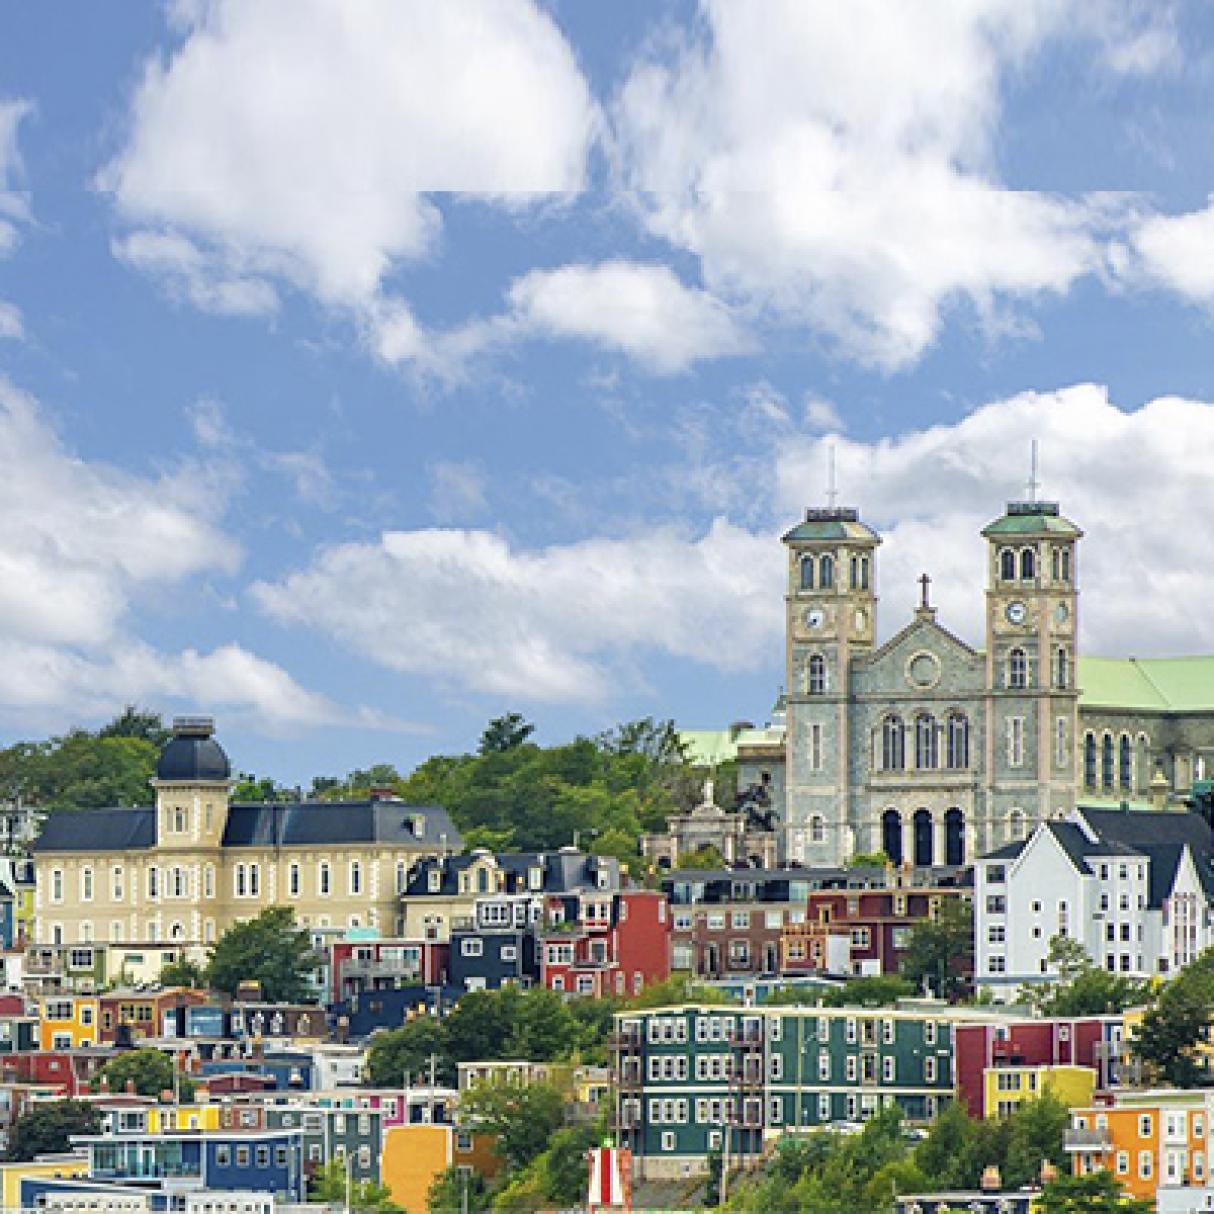 City view of the colourful houses in St John's Newfoundland